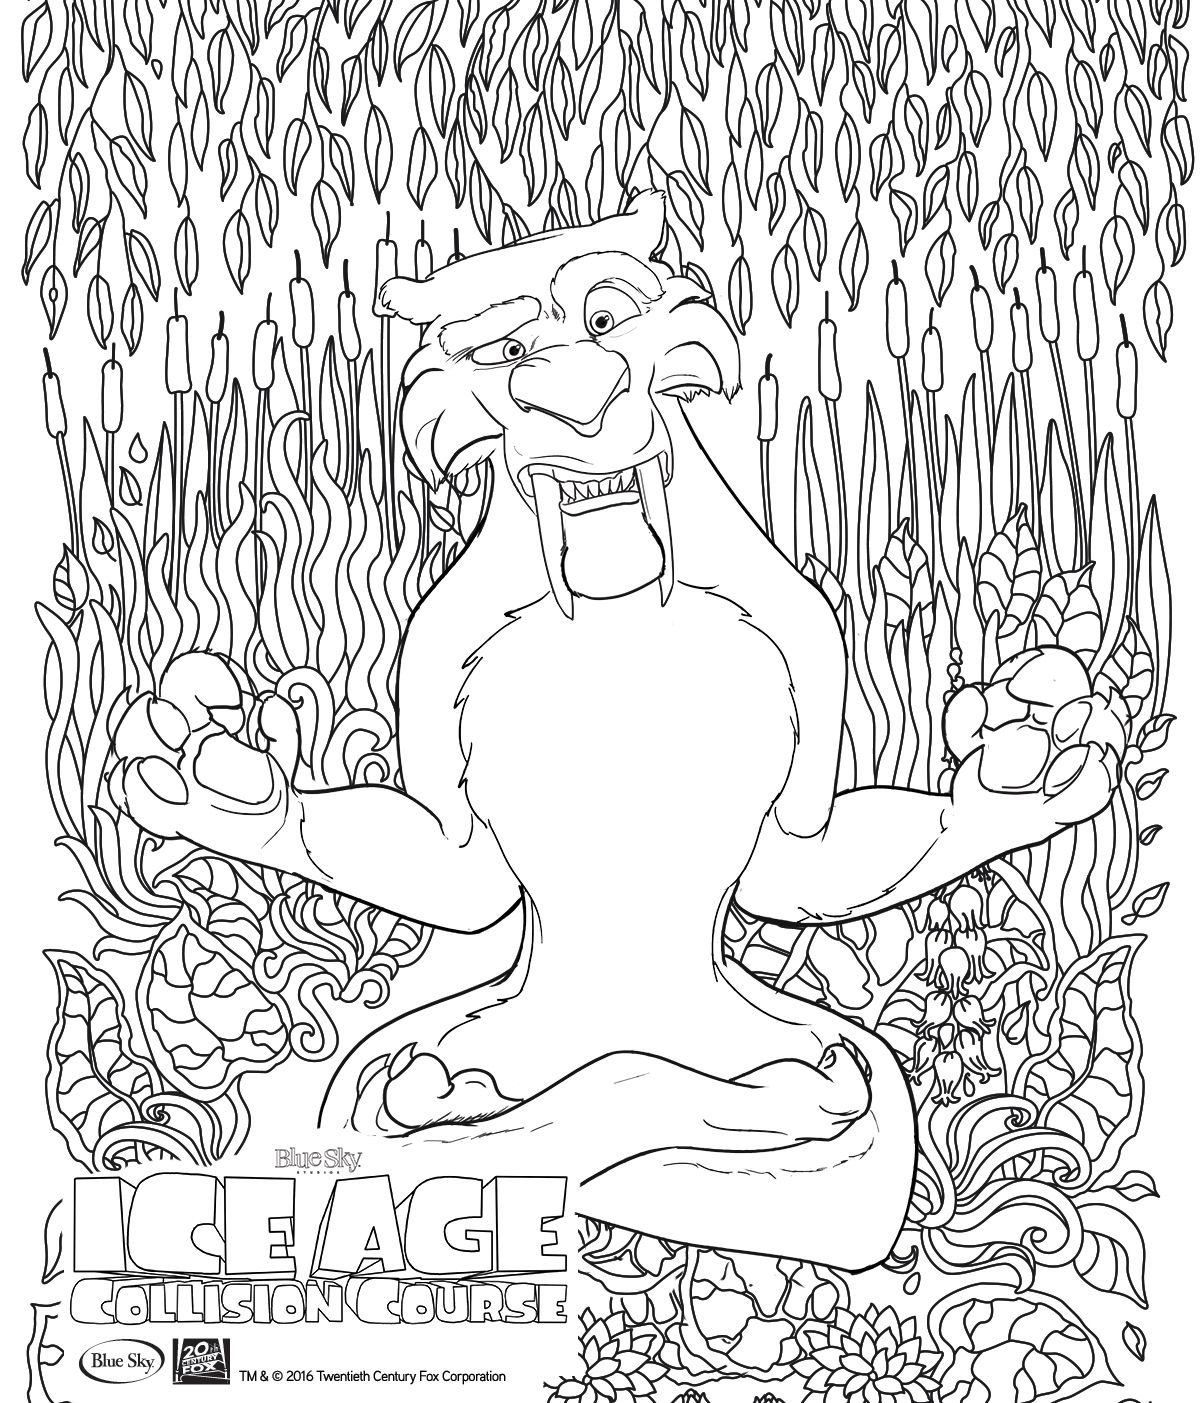 Ice Age Collision Course colouring-in pages for kids - Families Online